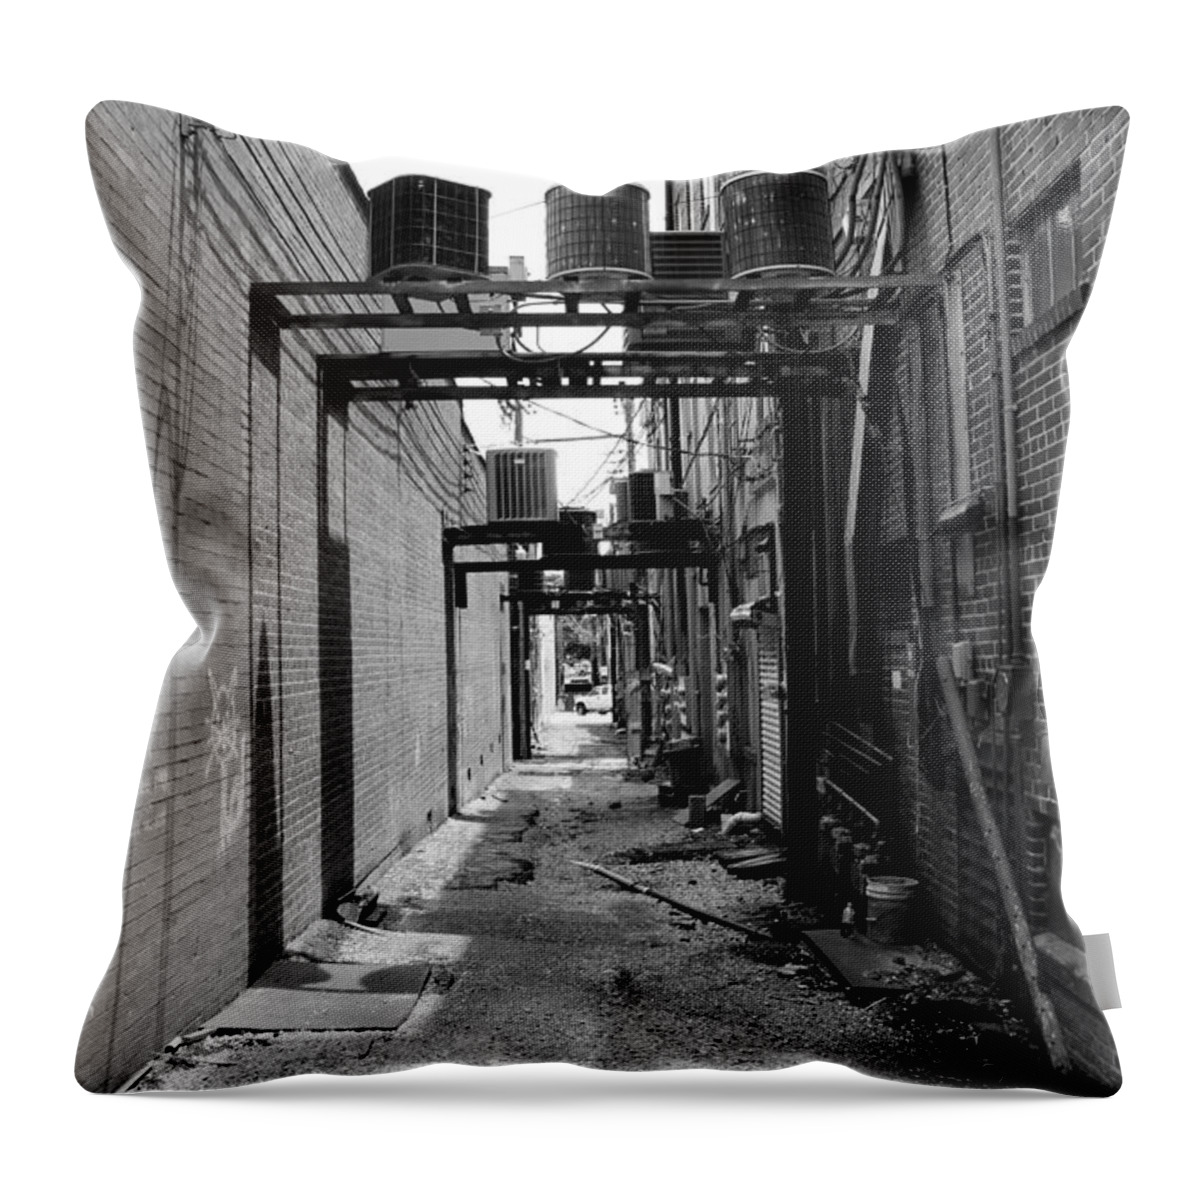 Photo For Sale Throw Pillow featuring the photograph Air Conditioner Alley by Robert Wilder Jr